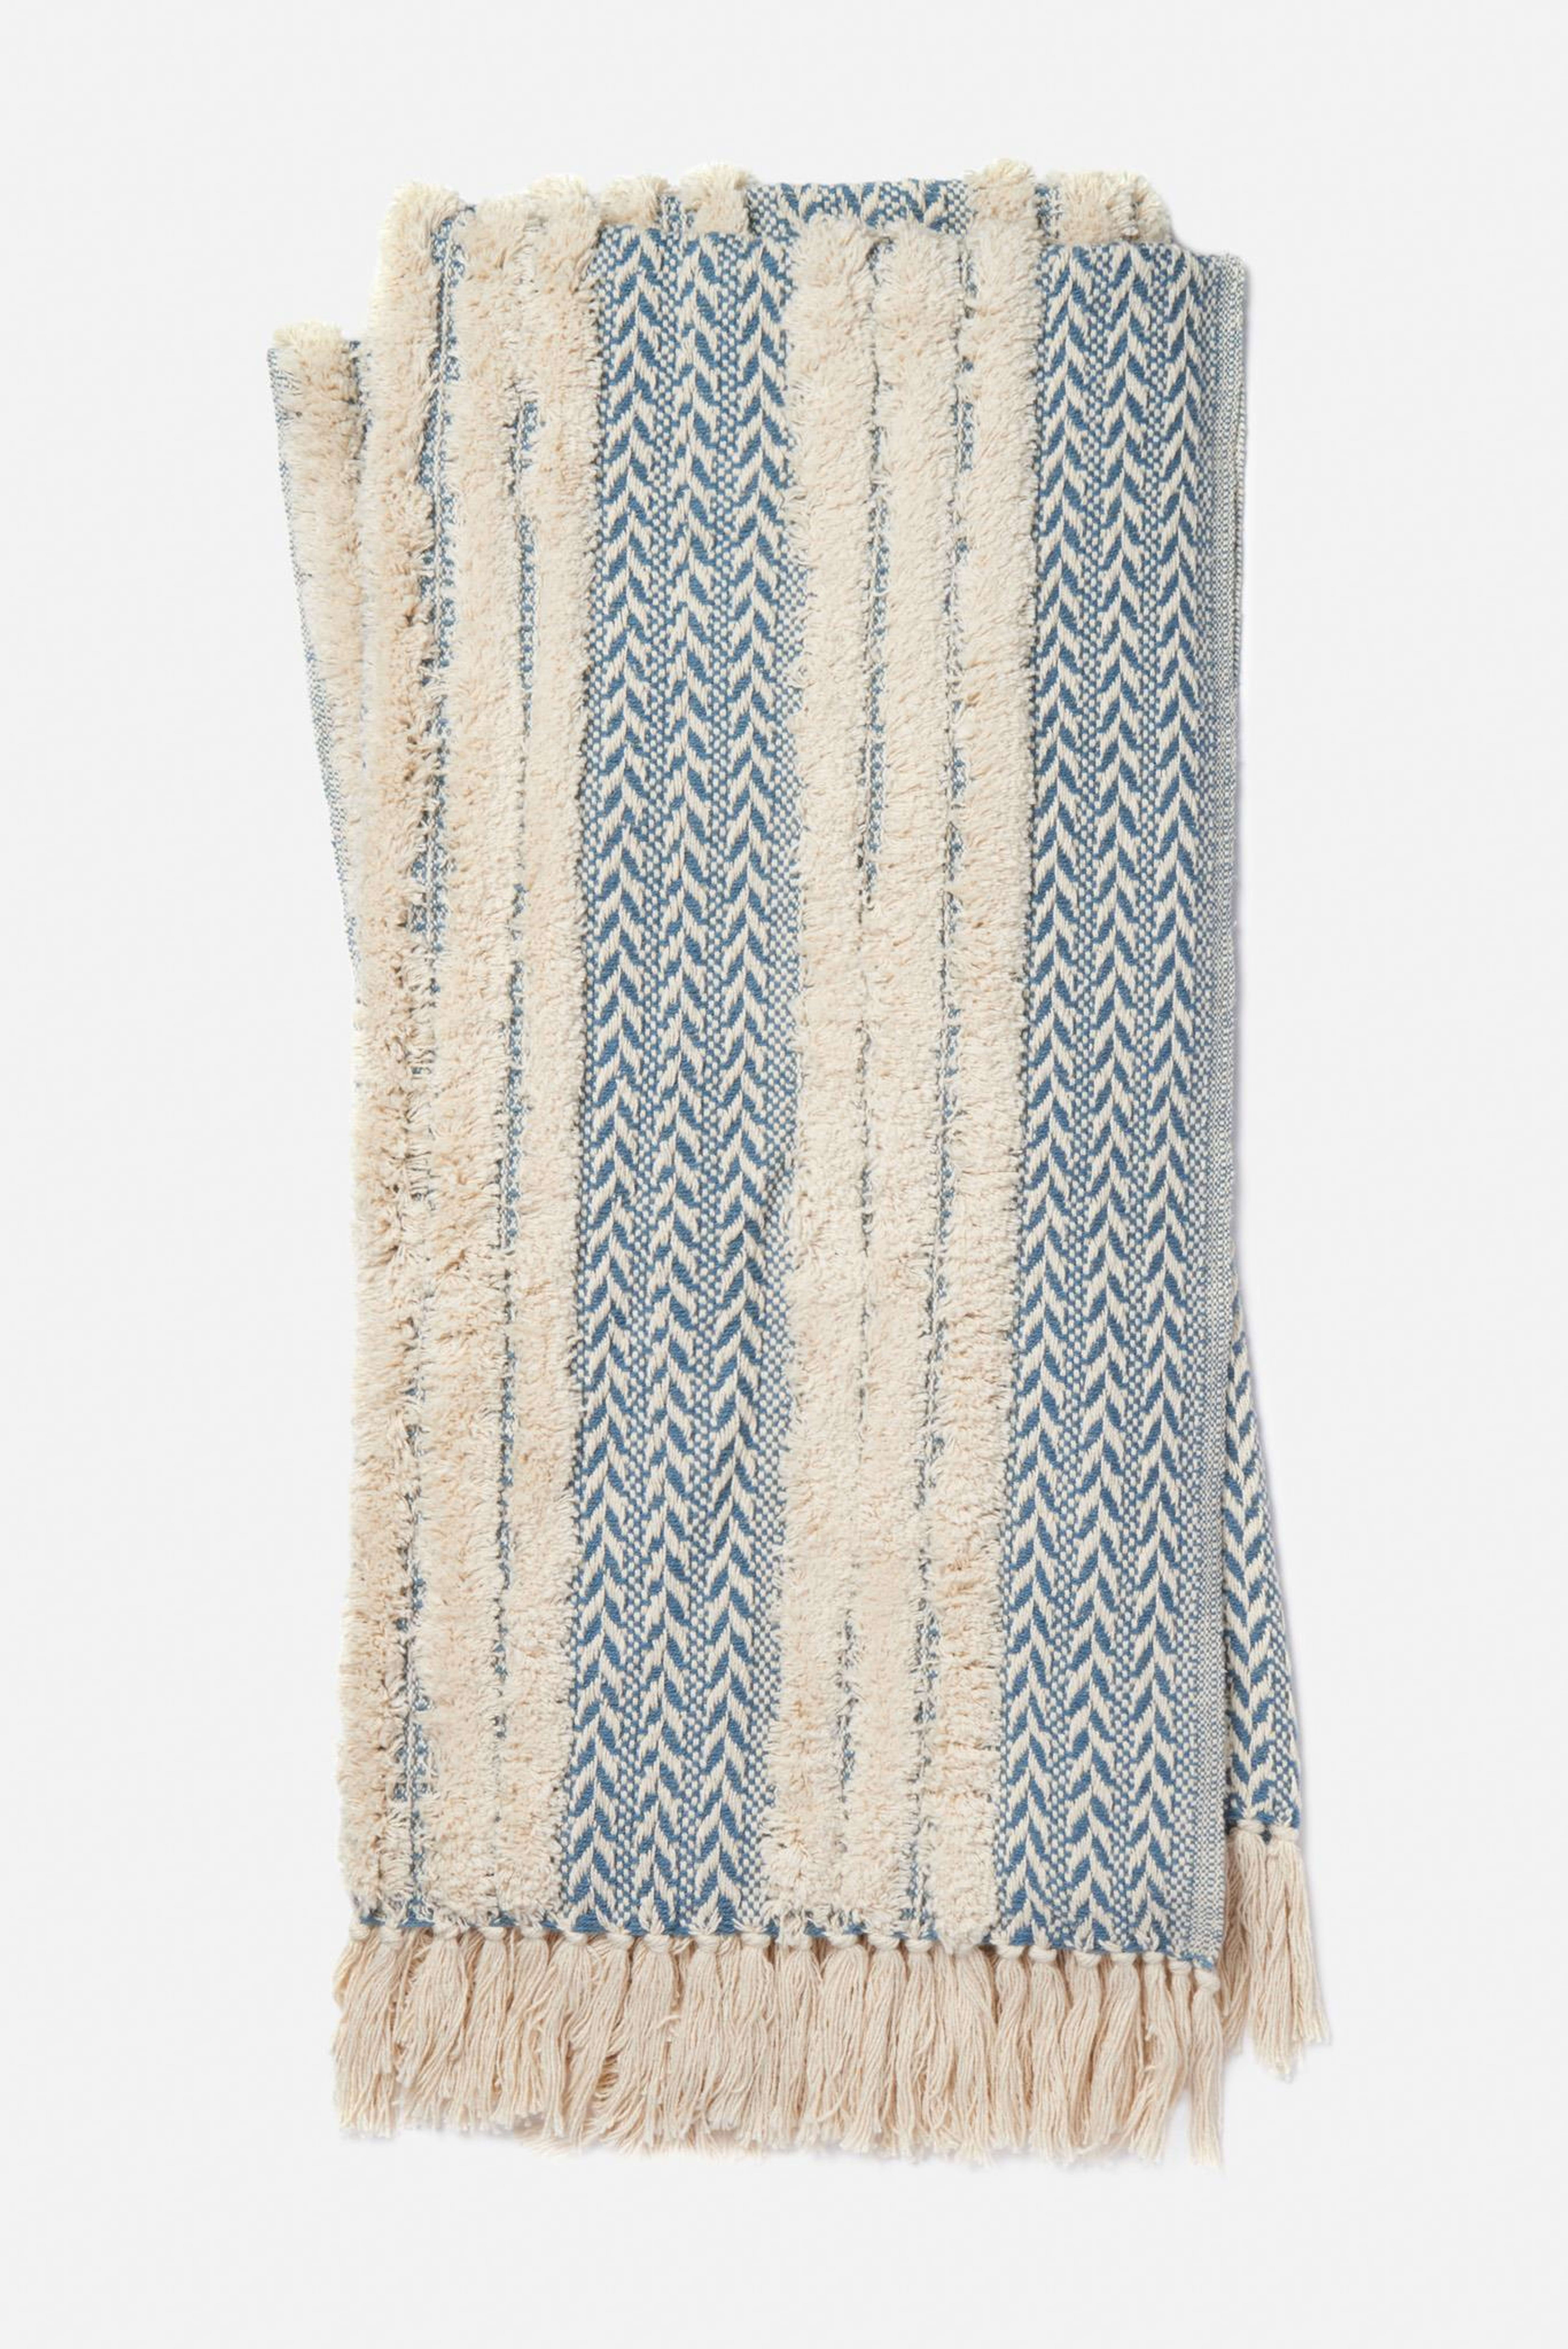 COLLEEN - BLUE / IVORY - Loloi Rugs